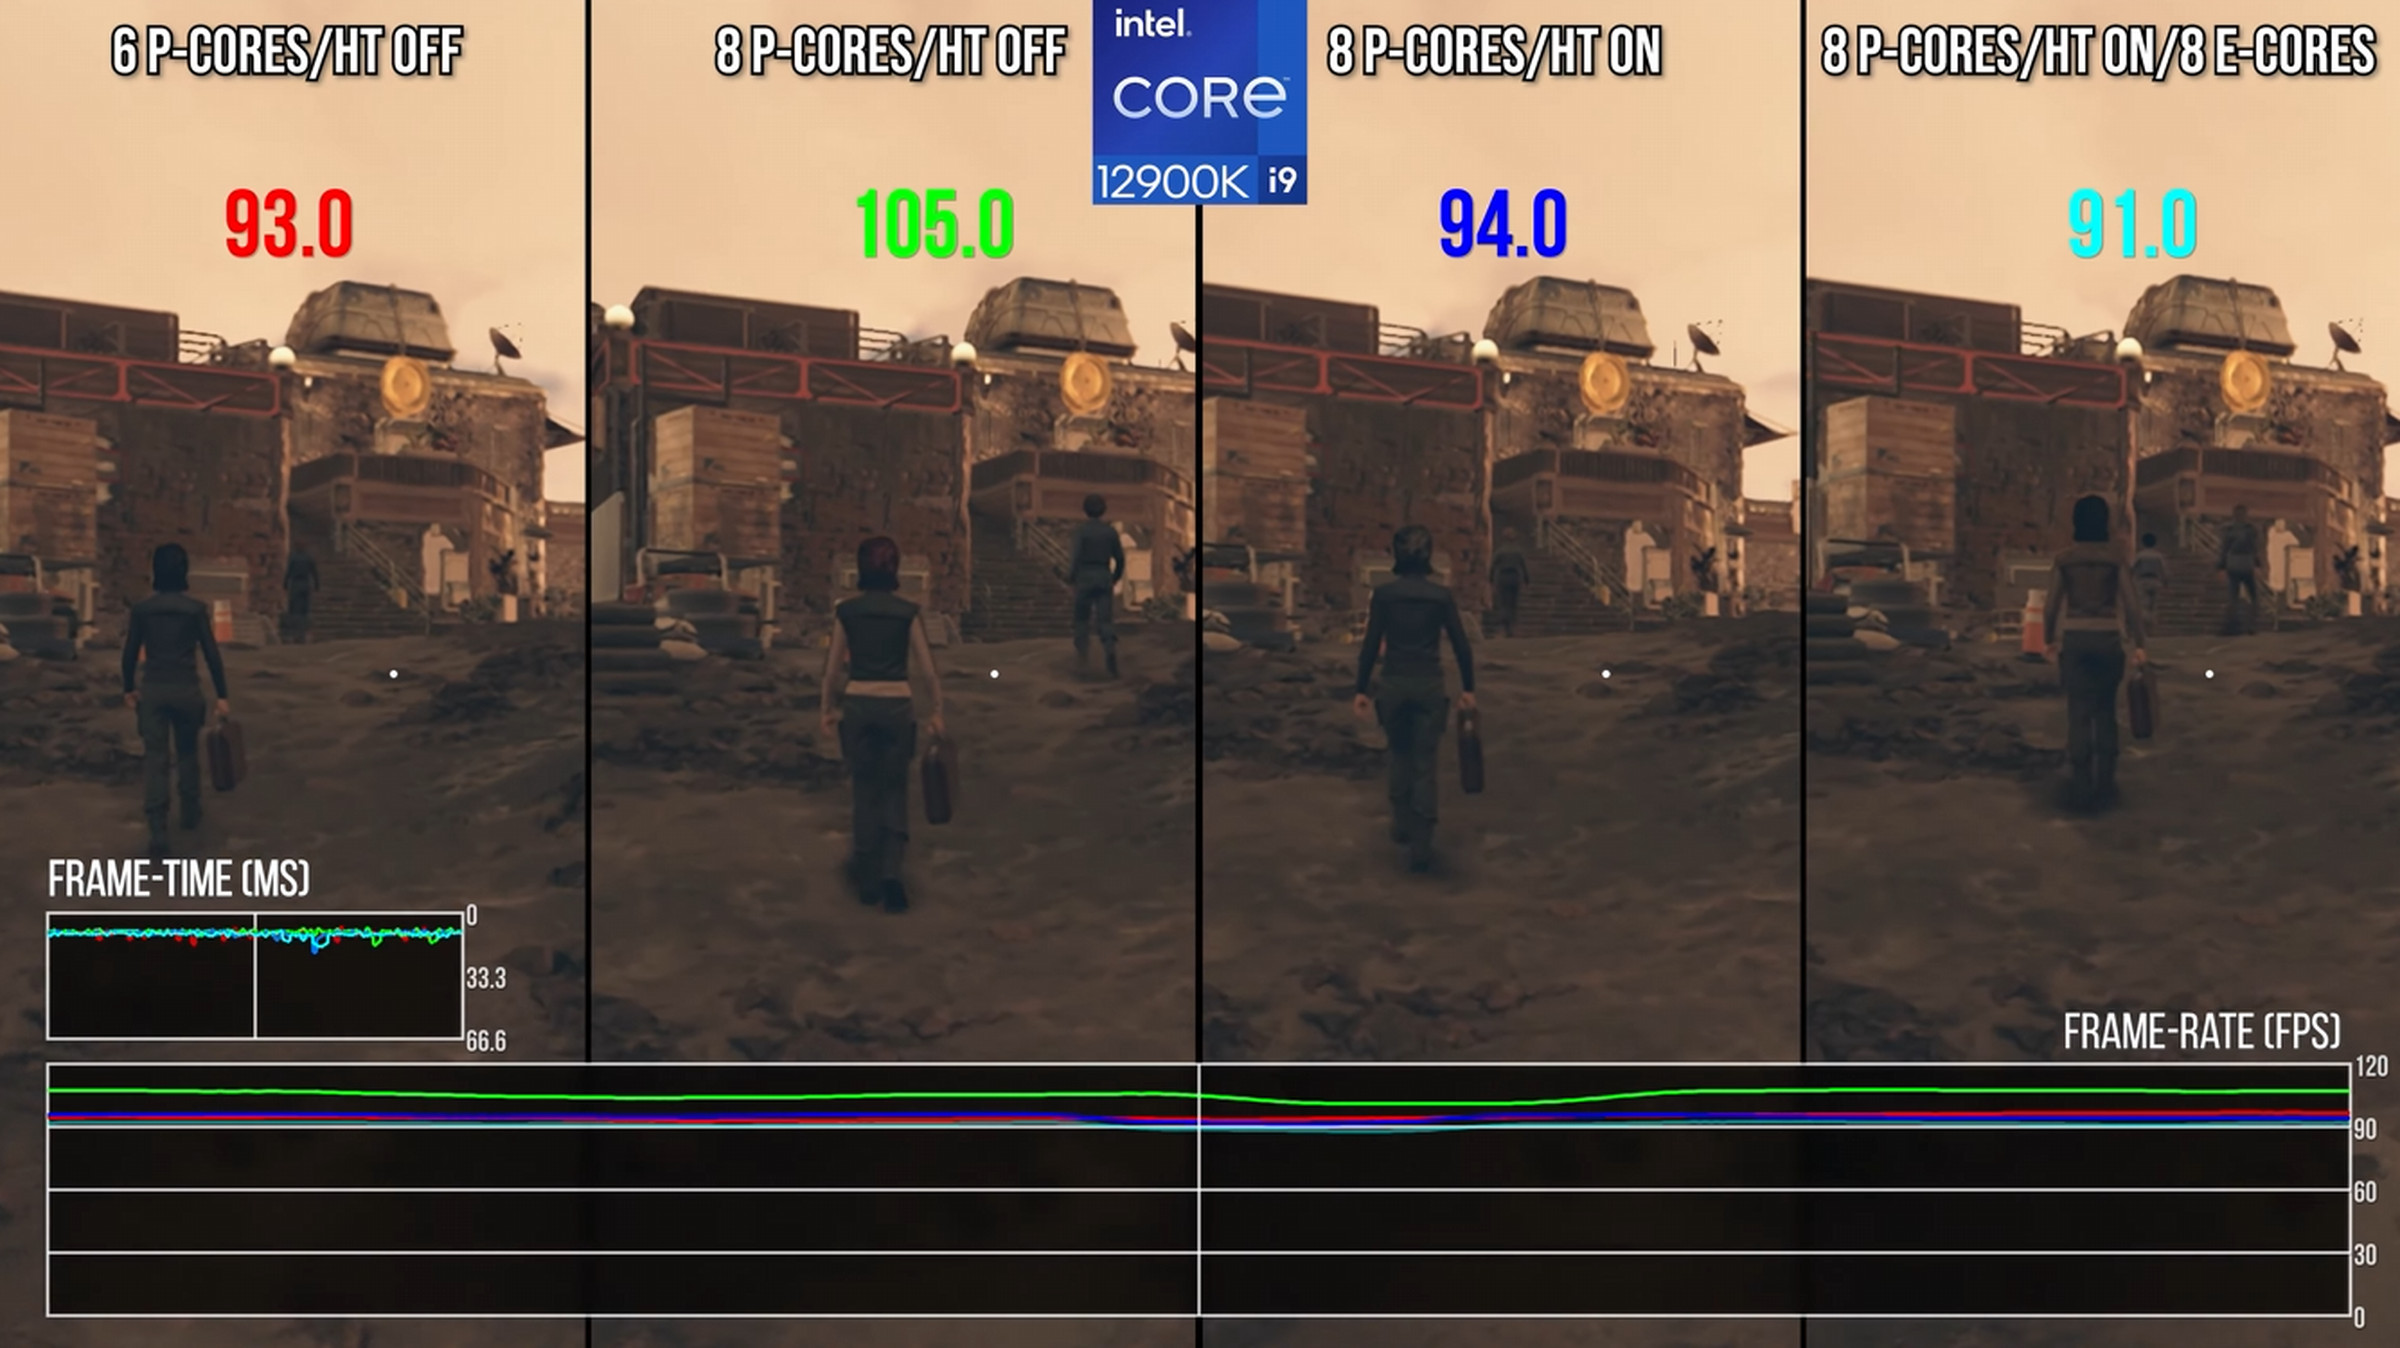 Enabling hyperthreading on some Intel chips impacts Starfield’s performance.